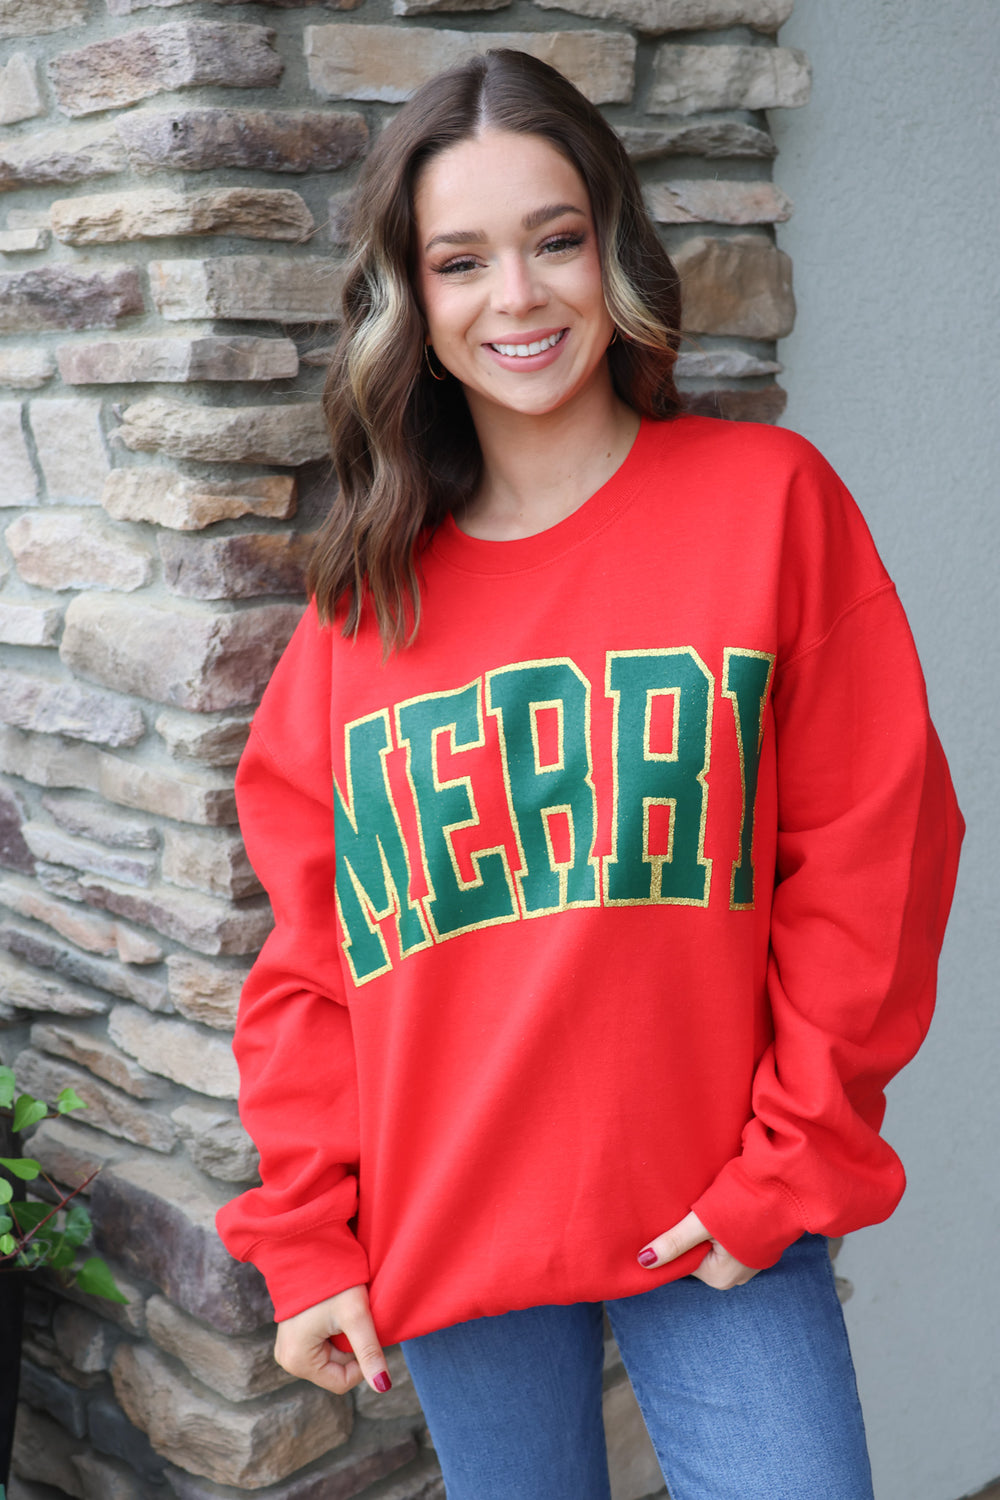 Merry Sweatshirt In Red - Shop Spoiled Boutique 